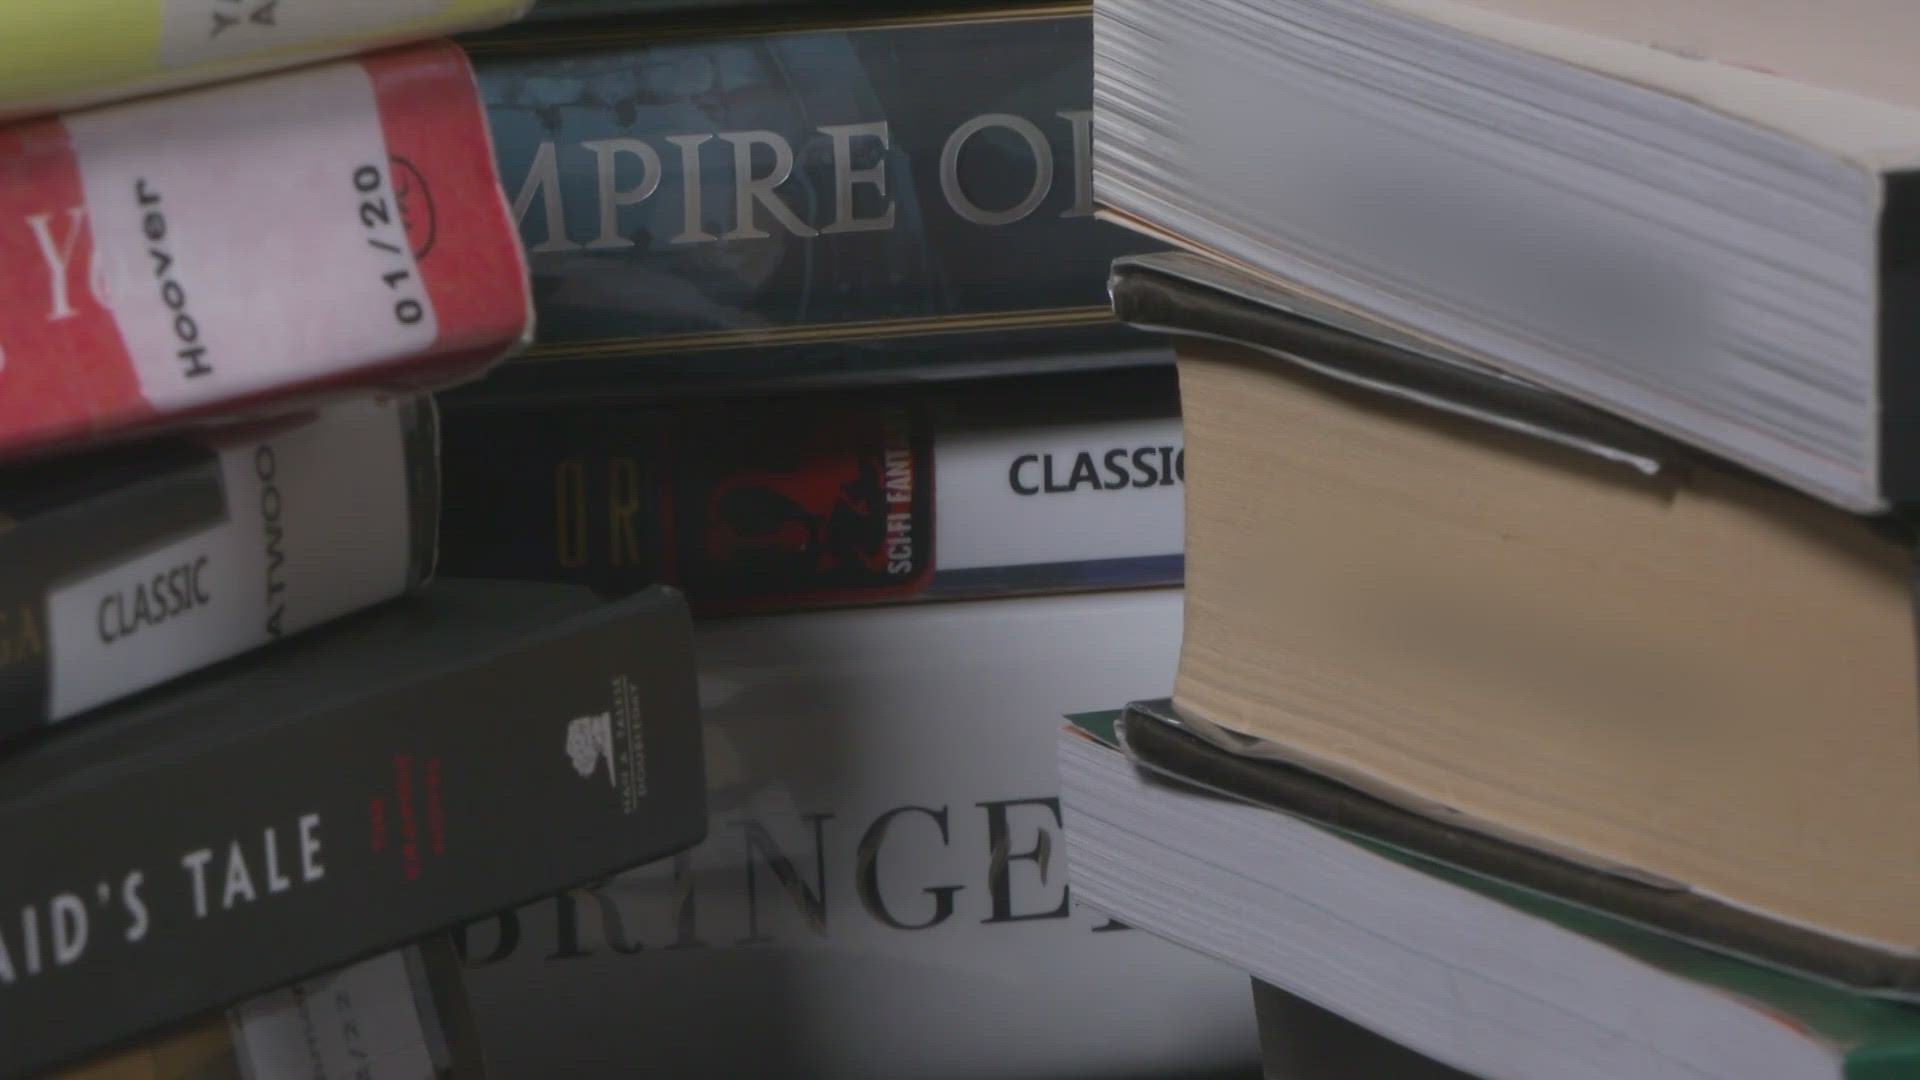 A KHOU 11 Investigation found Conroe ISD banned 59 books this year. Organized groups are behind the complaints.